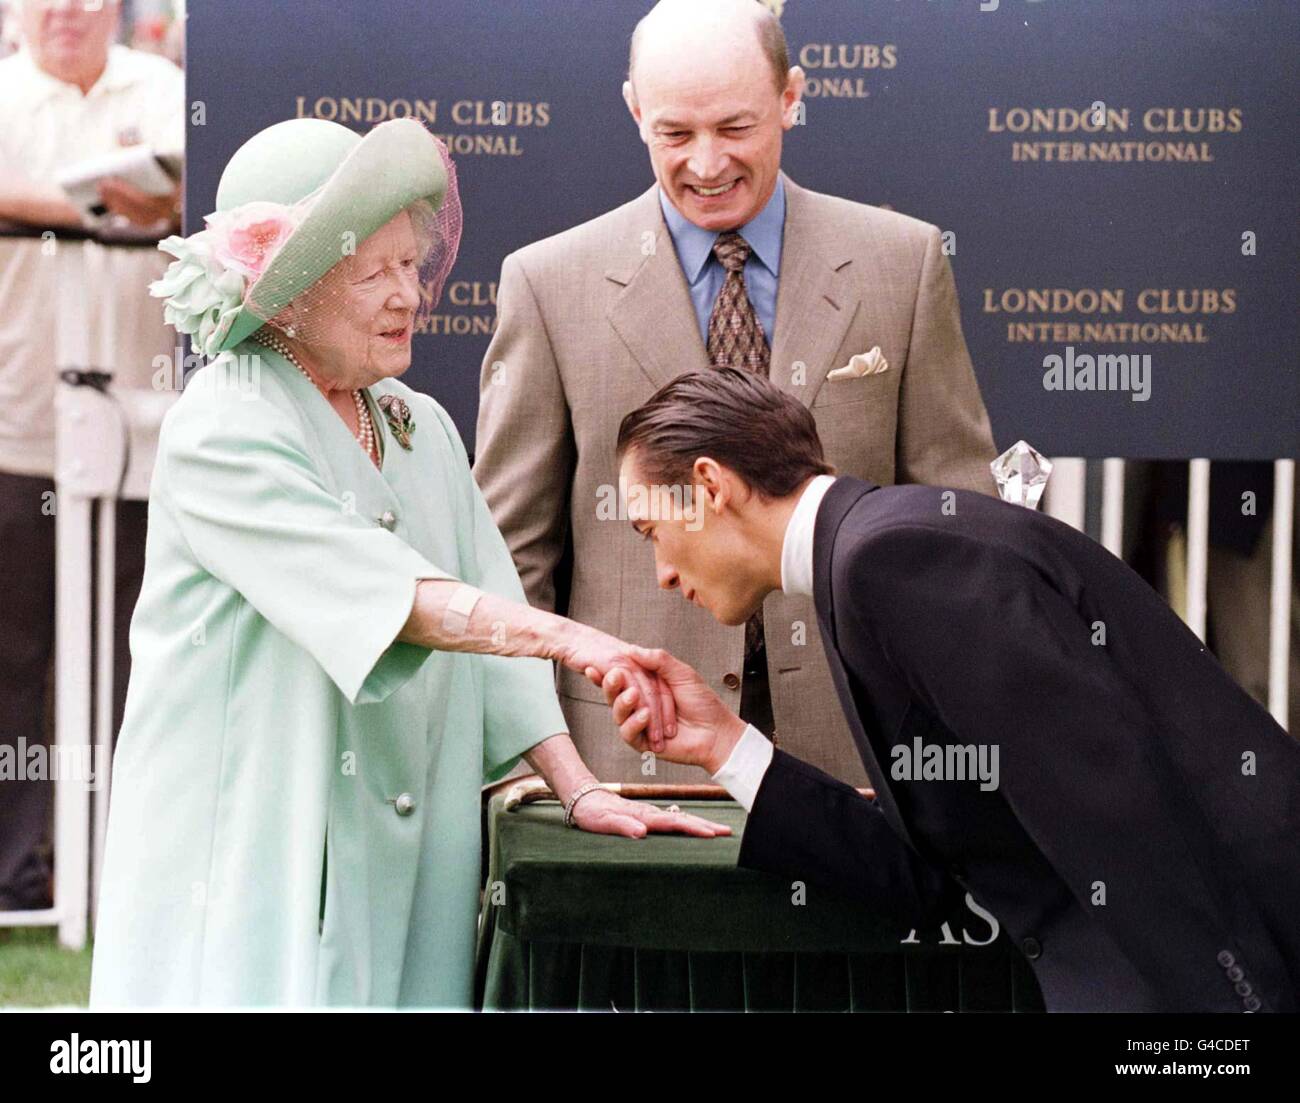 Jockey, Frankie Dettori, kisses the Queen Mother's hand after she presented him with the 'London Clubs Trophy' for the leading rider at Ascot today (Saturday). The Italian has amassed an impressive seven victories over the four days of the Royal Meeting. Photo by Tom Hevezi/PA Stock Photo